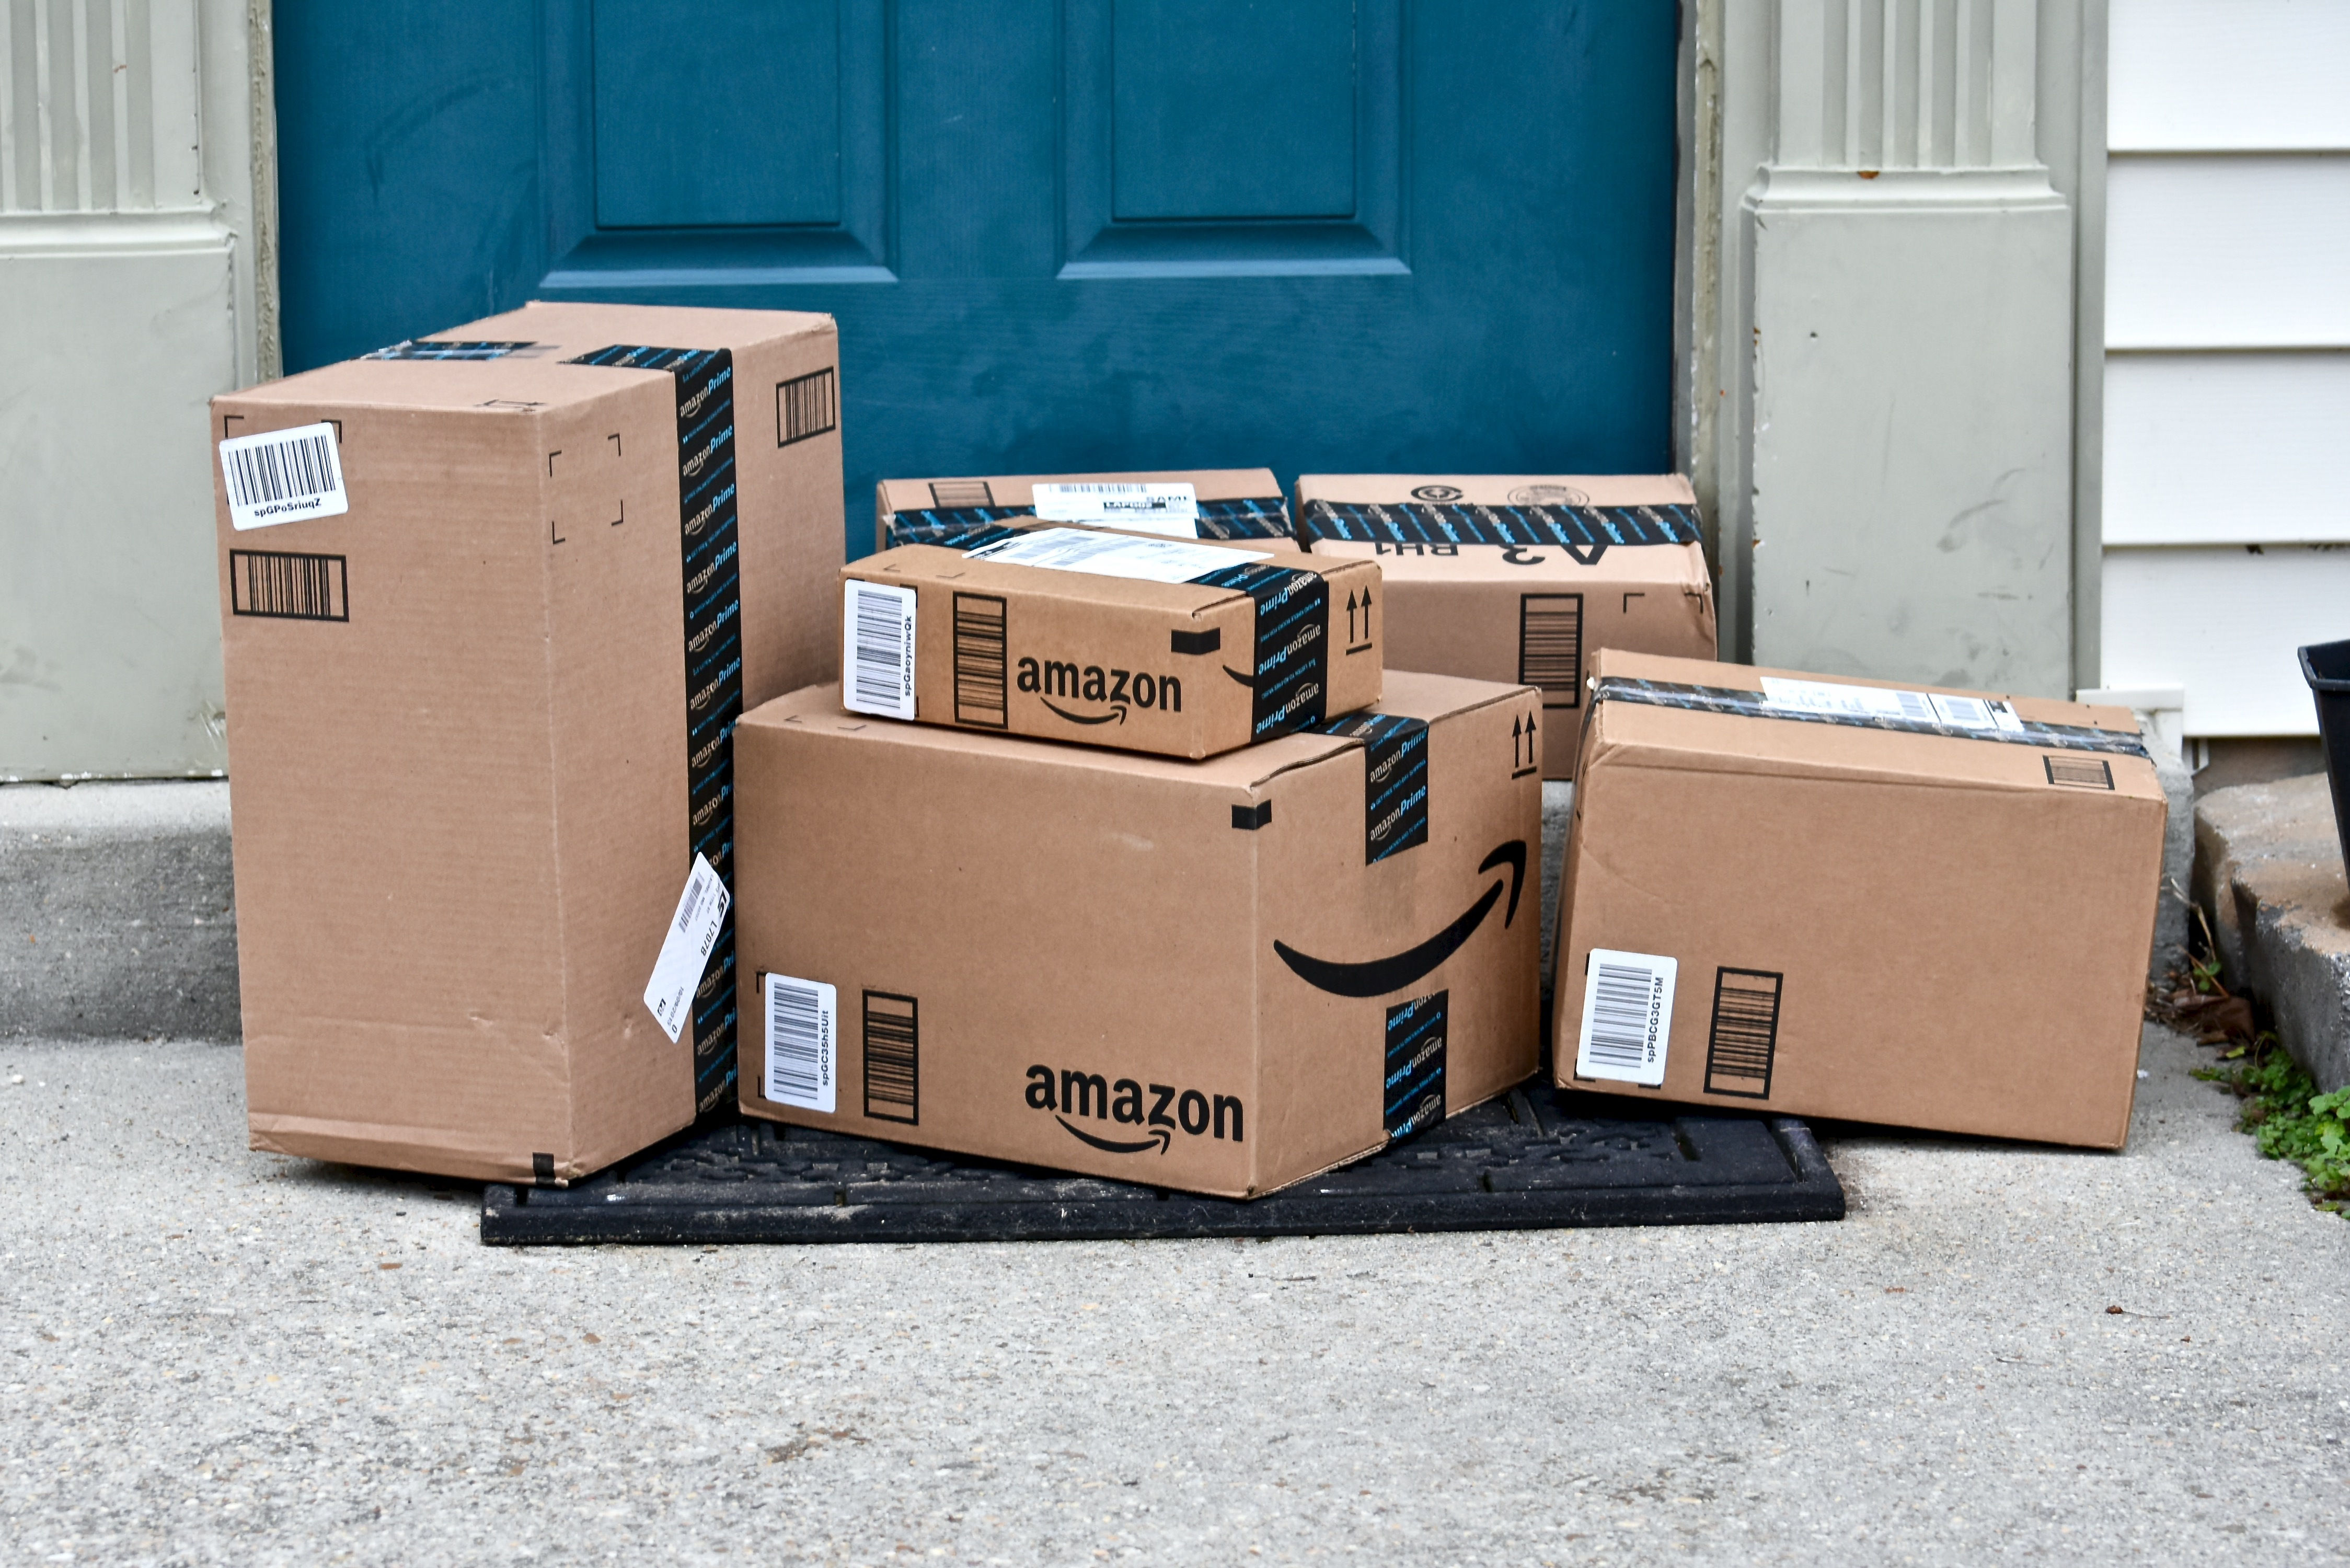 Amazon shipping boxes piled on a doorstep.